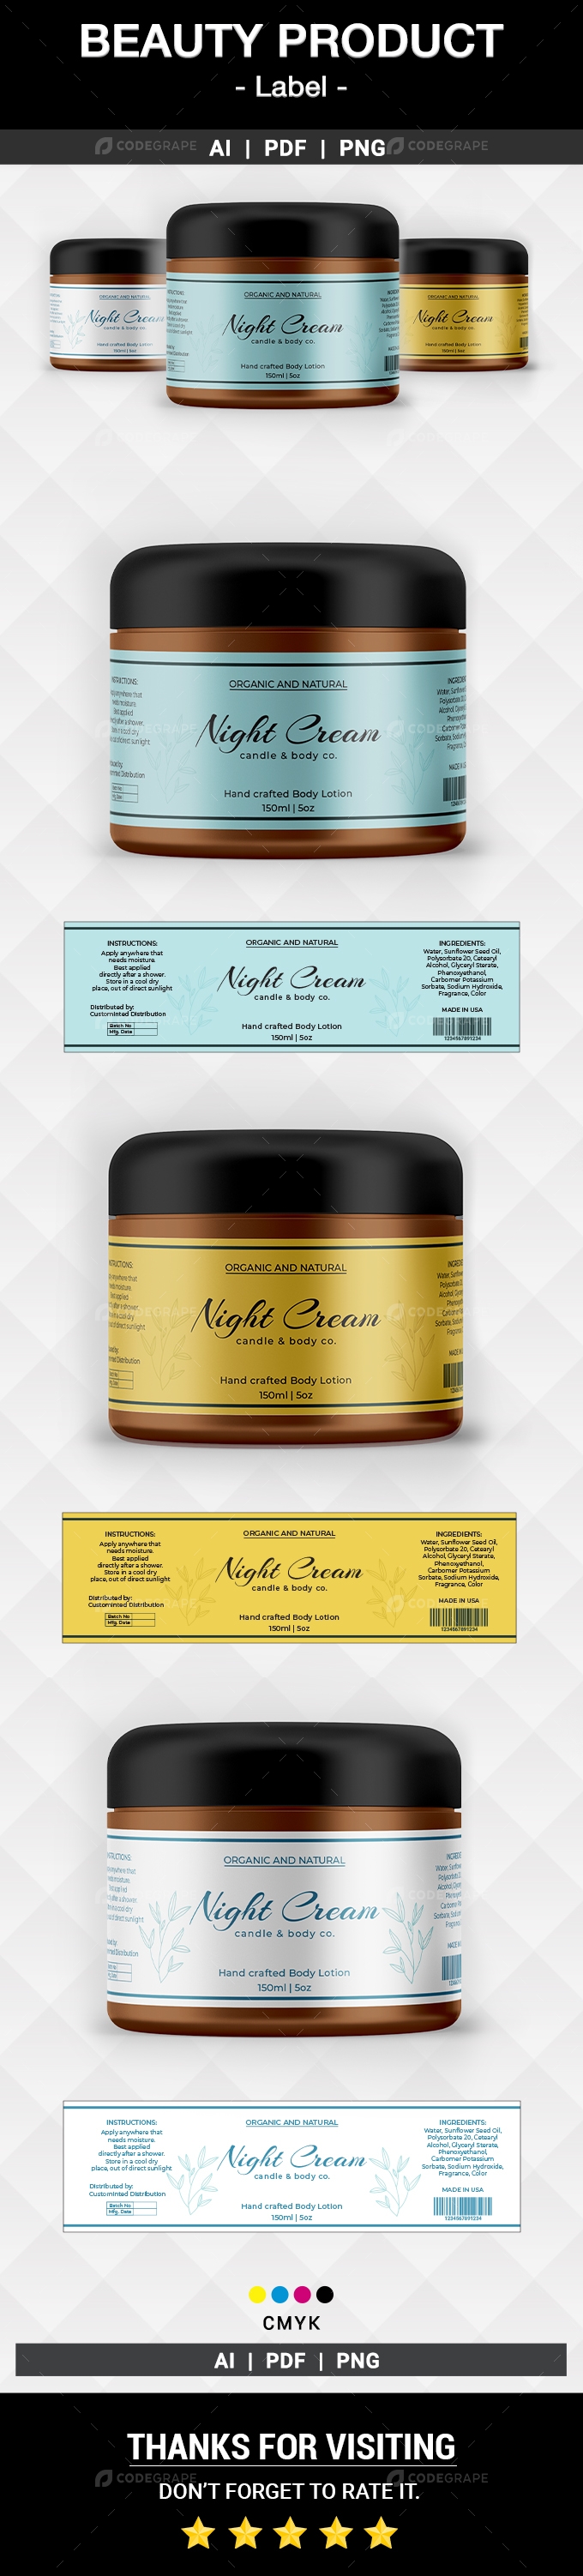 Beauty Product Label